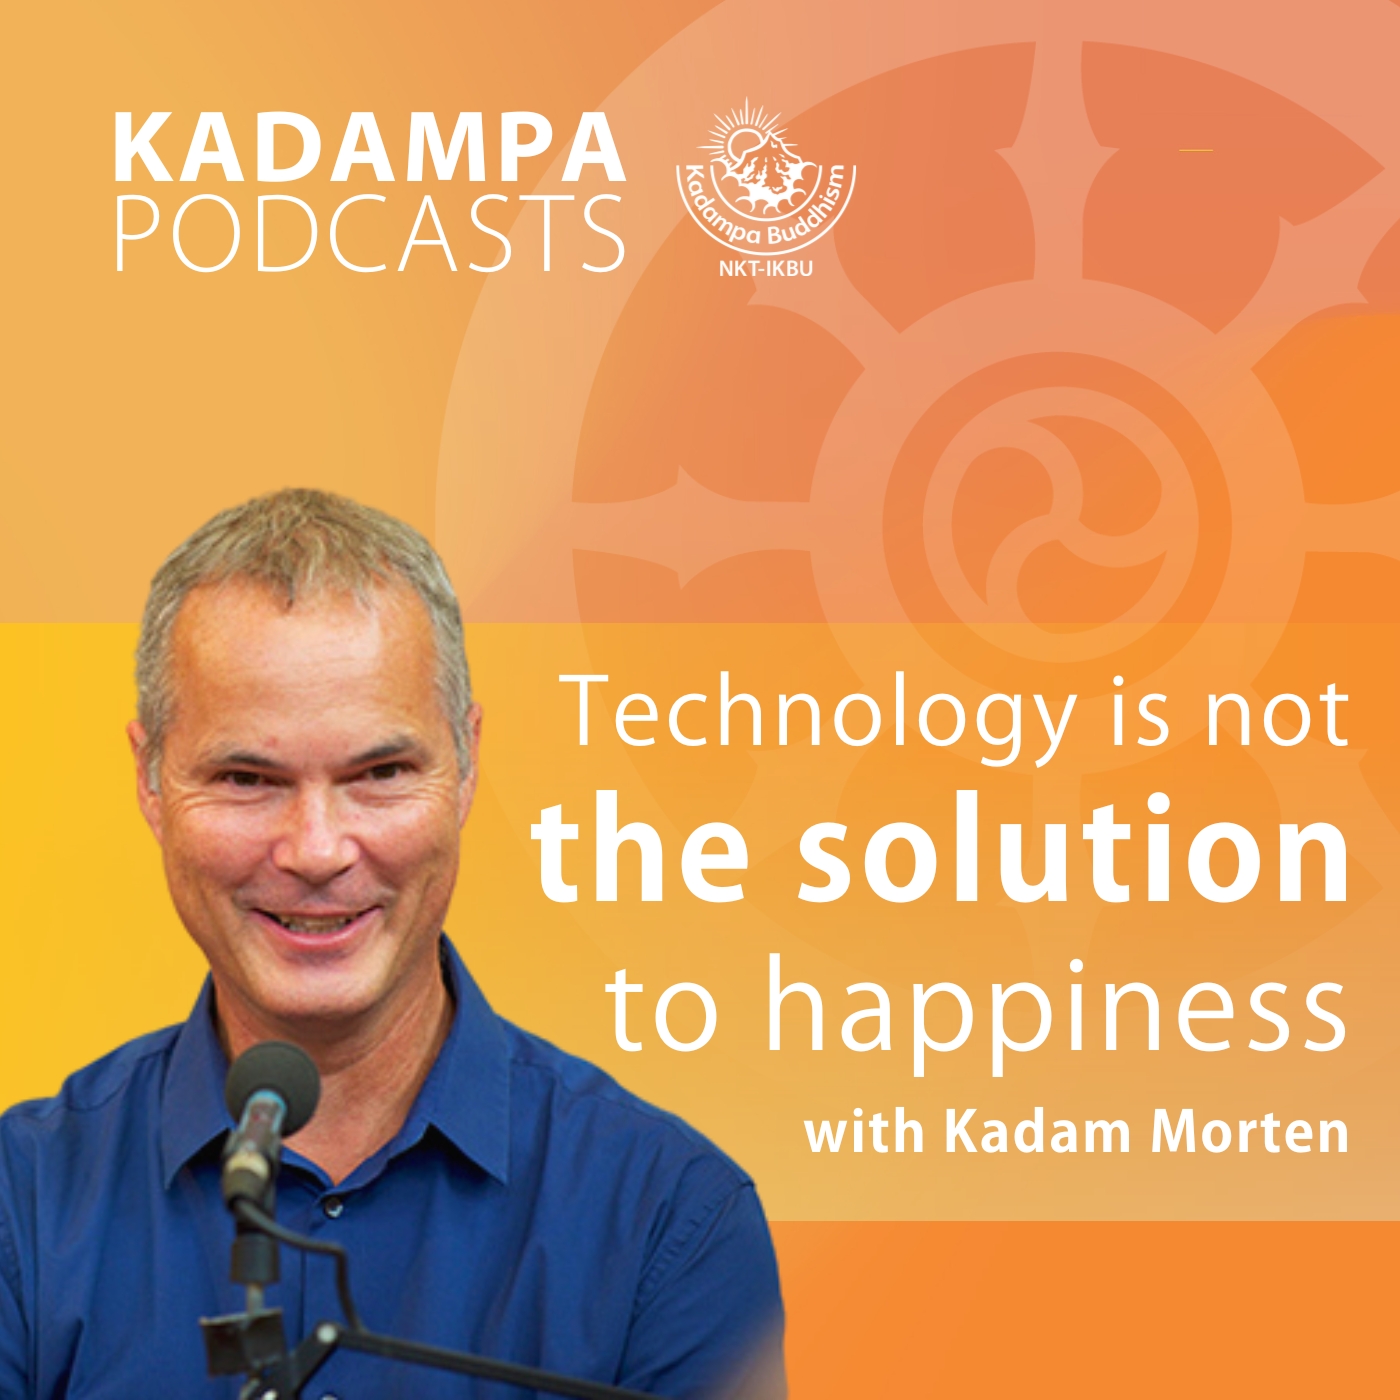 Technology is not the solution to happiness